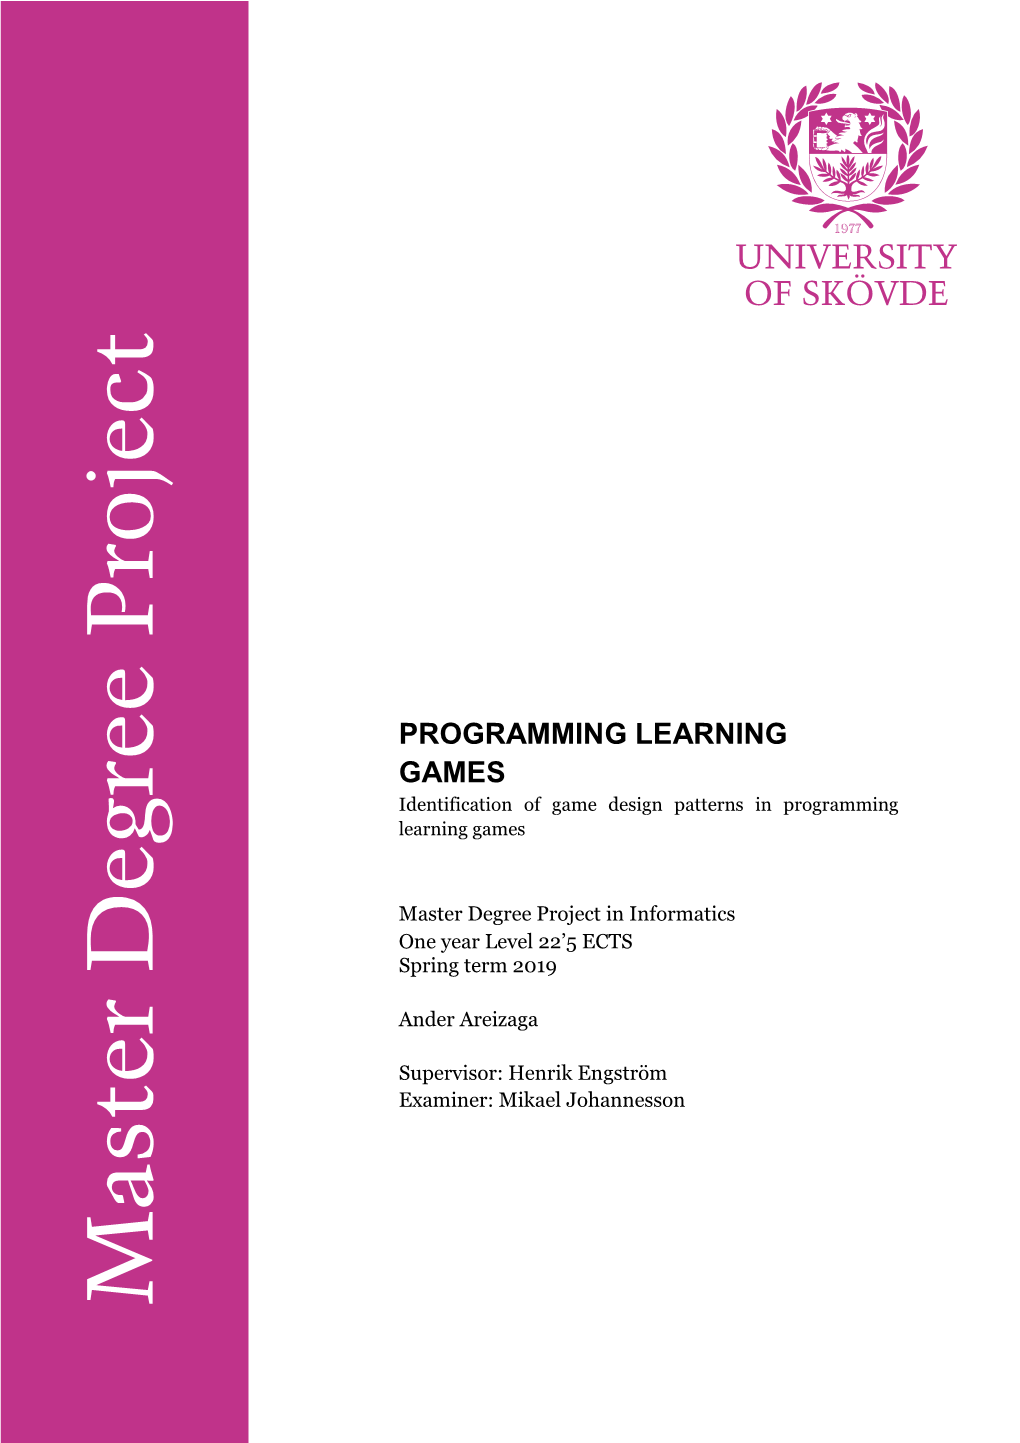 PROGRAMMING LEARNING GAMES Identification of Game Design Patterns in Programming Learning Games